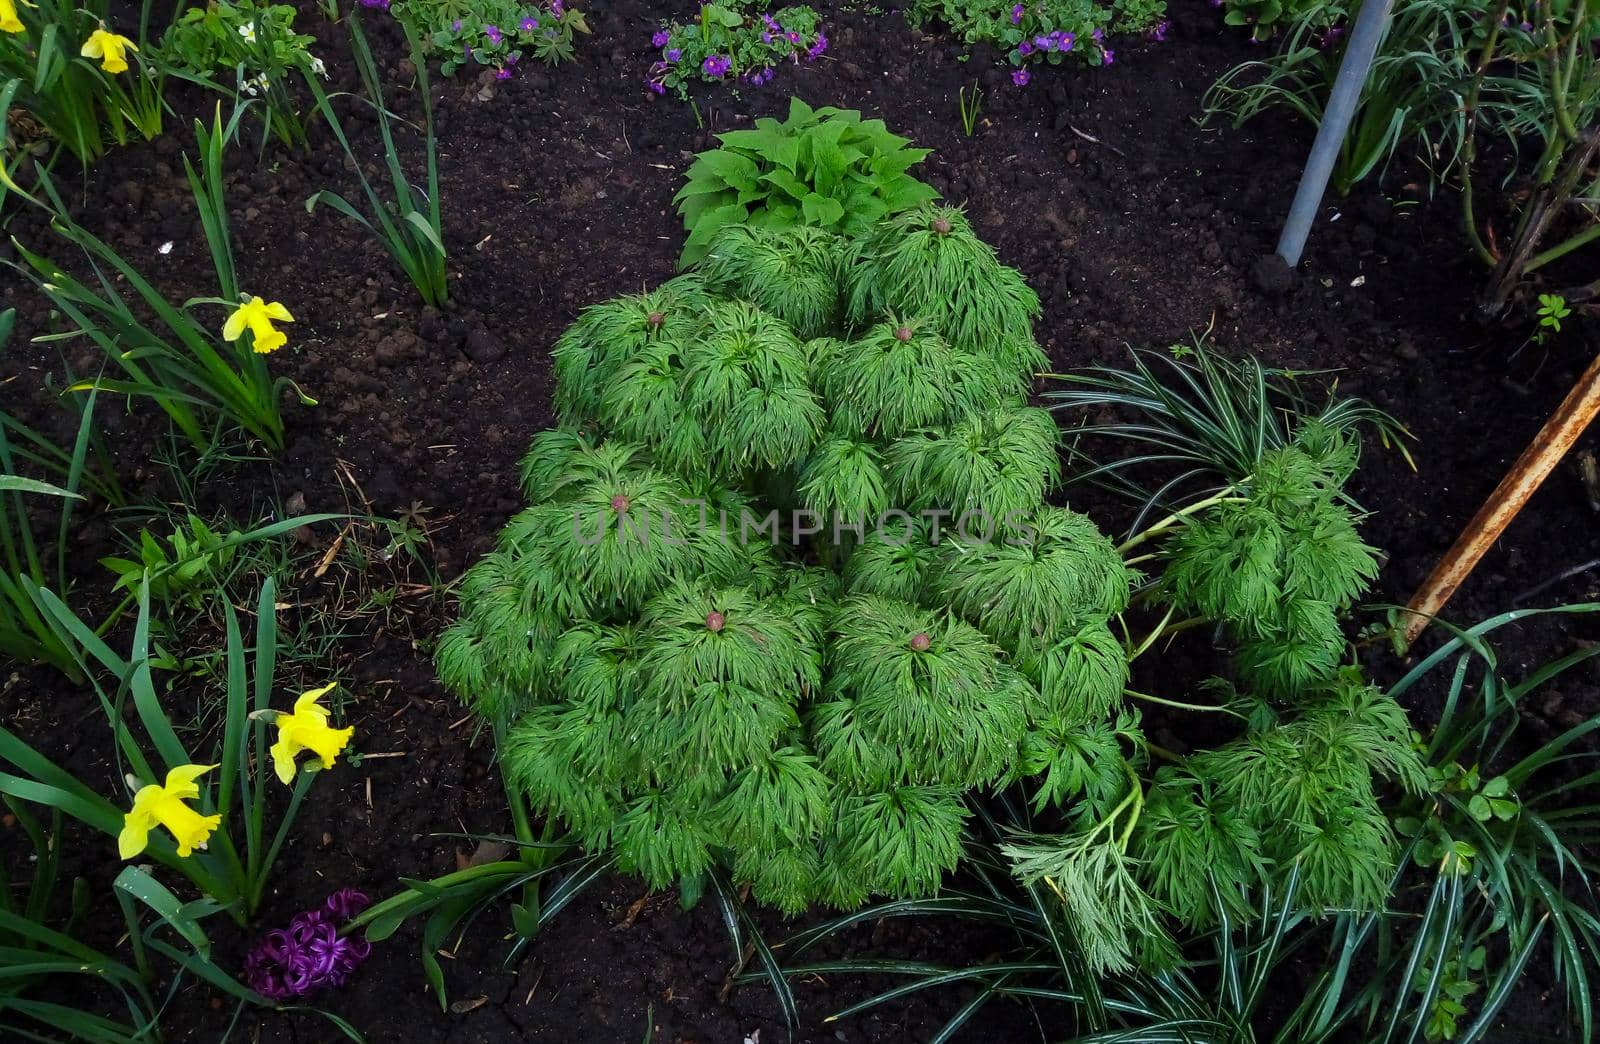 The fern-like peony Paeonia tenuifolia is a shrubby spring flower with raindrops.Top view.